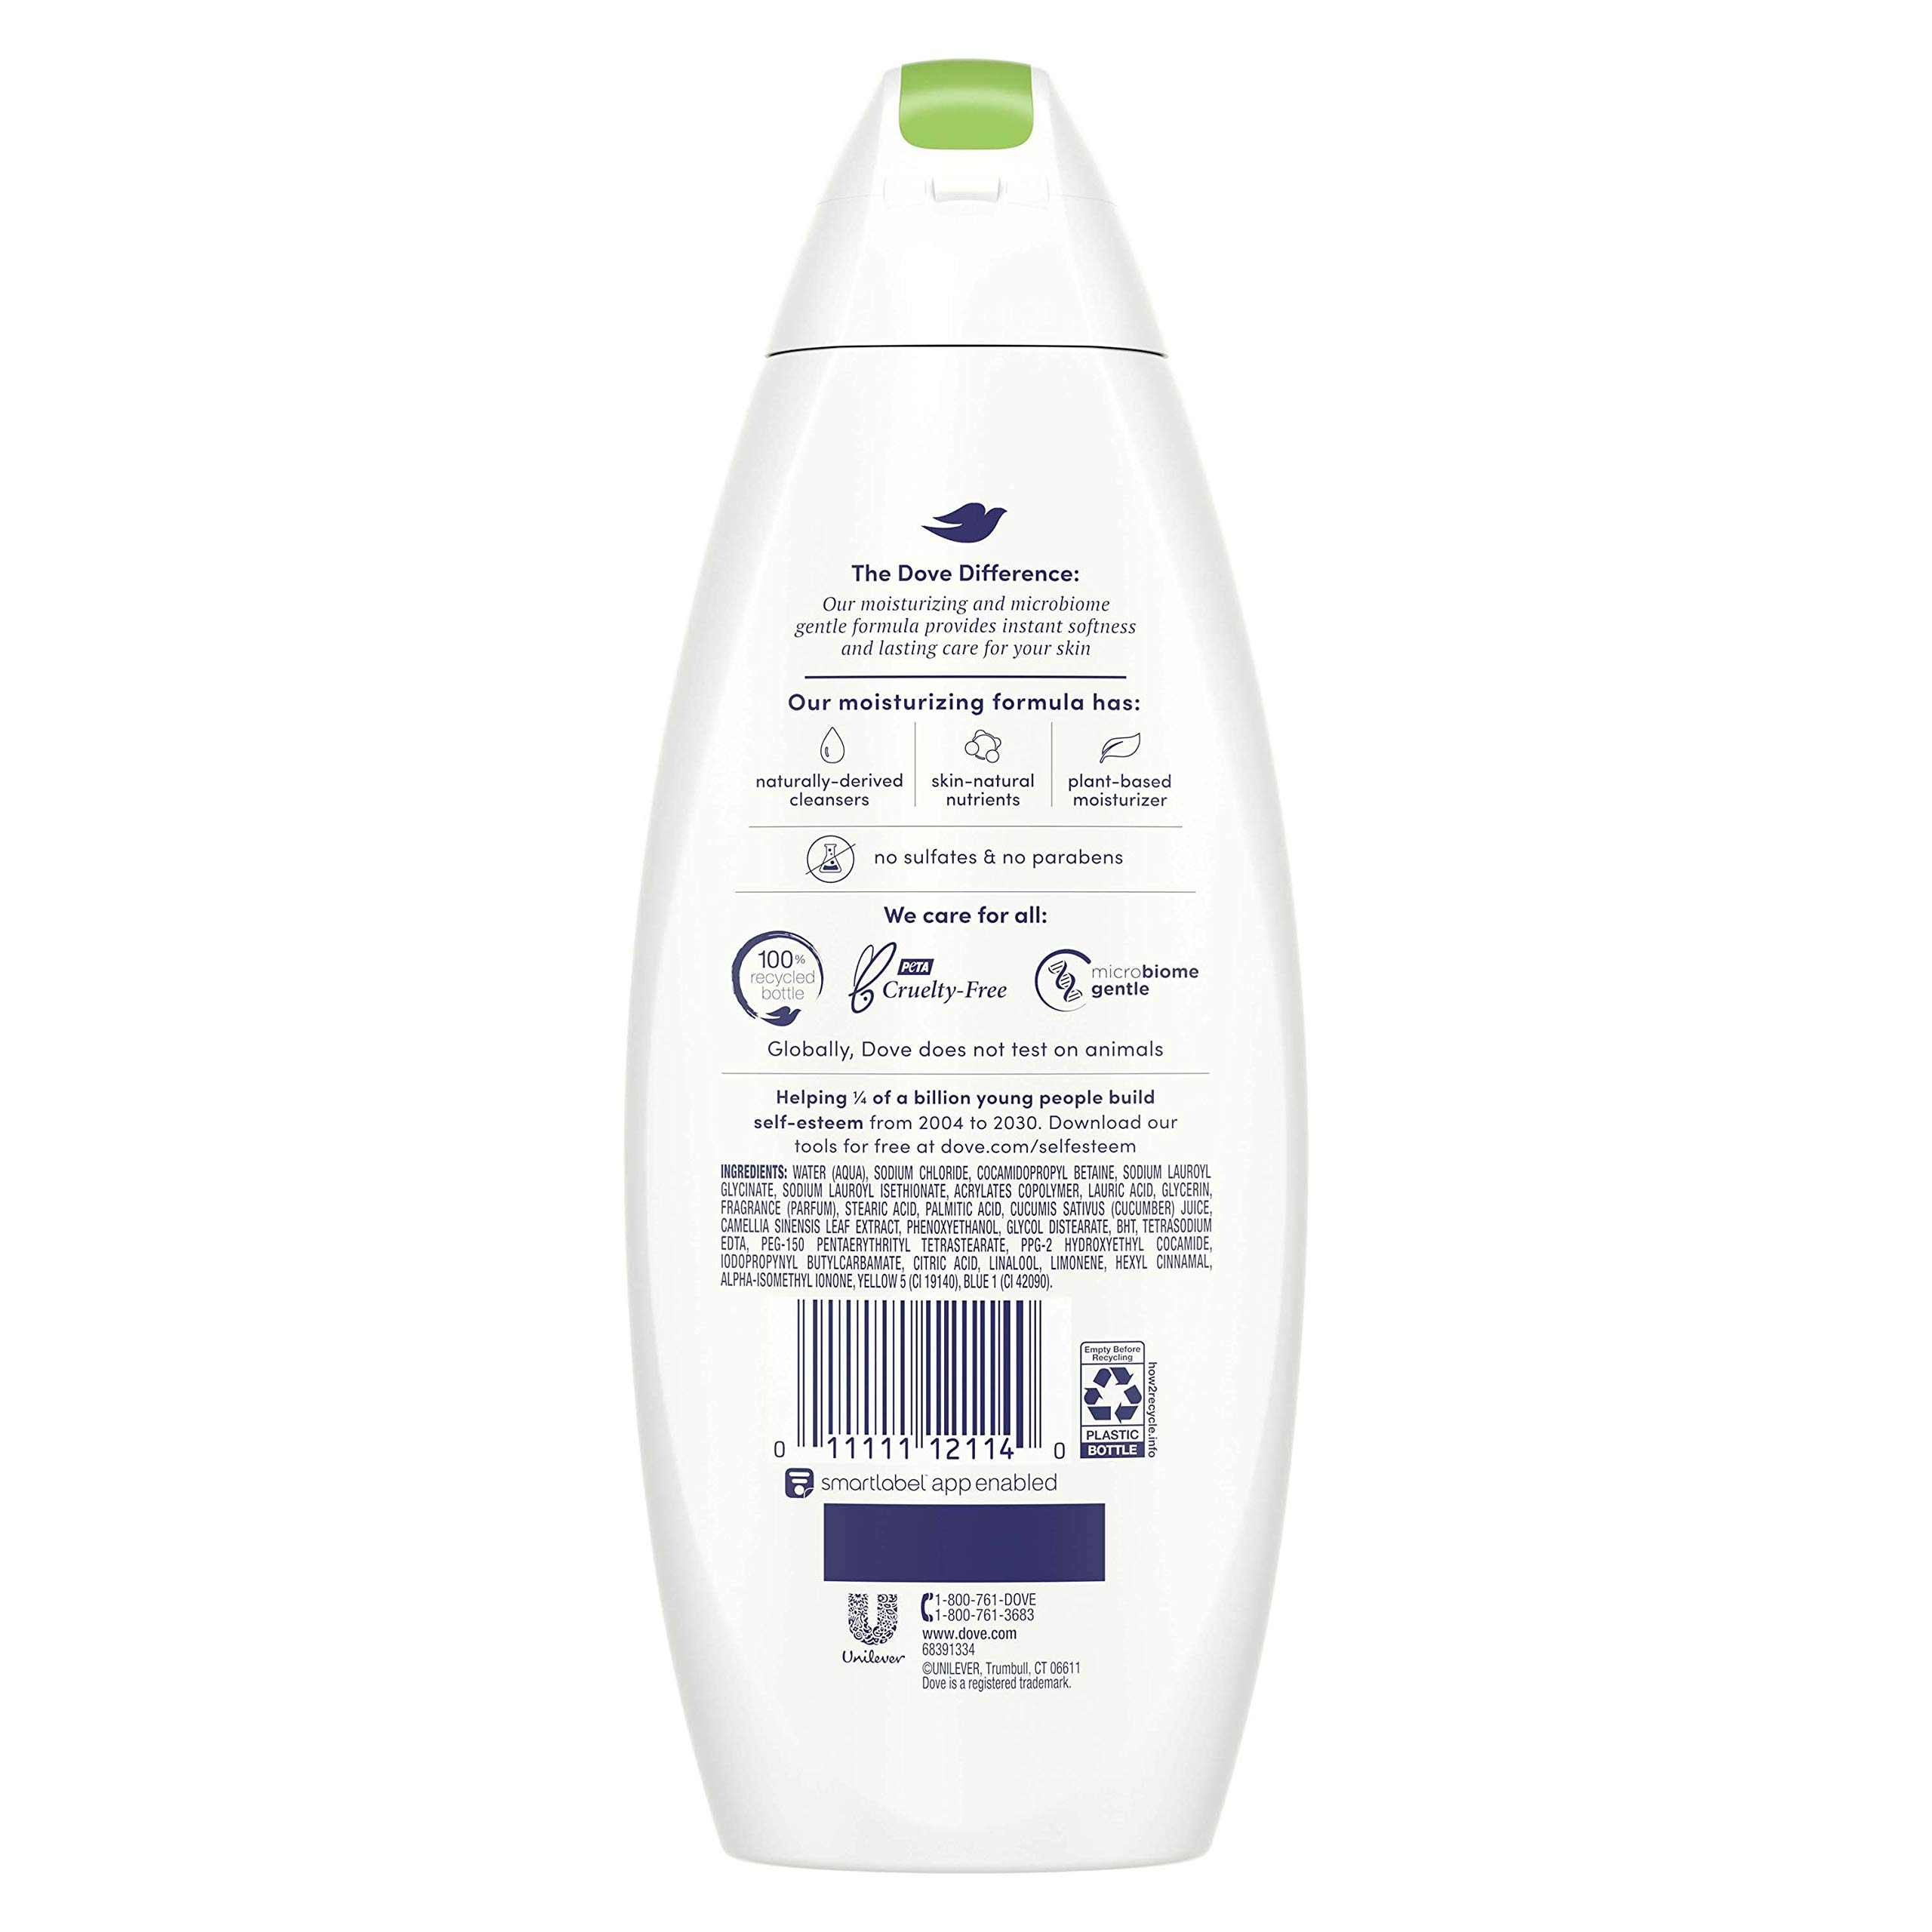 Dove go fresh Refreshing Body Wash Revitalizes and Refreshes Skin Cucumber and Green Tea Effectively Washes Away Bacteria While Nourishing Your Skin 12 oz